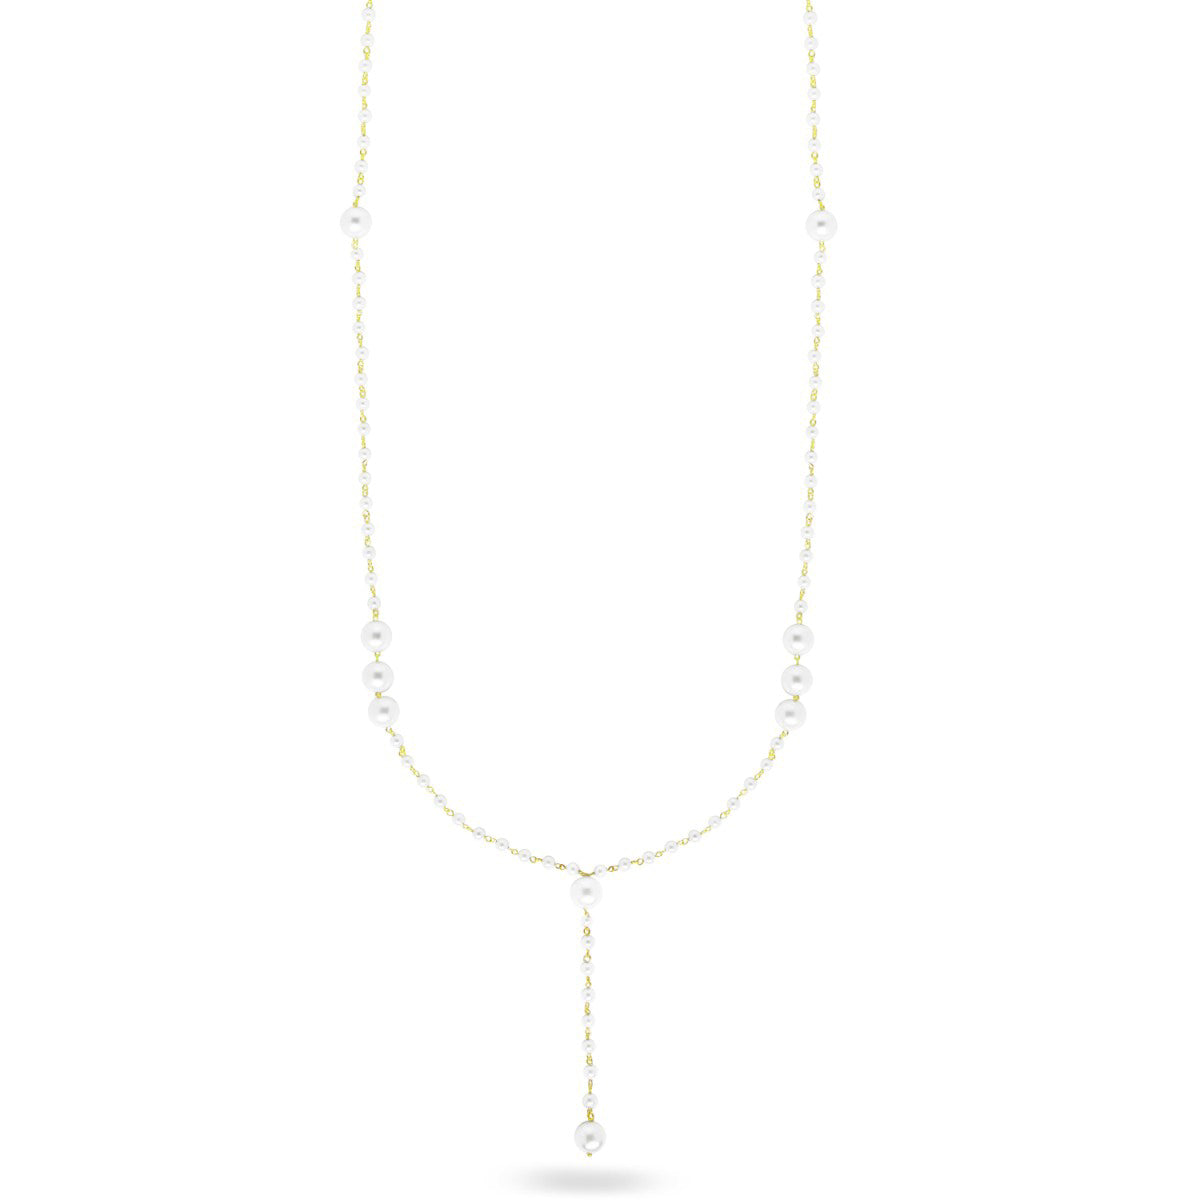 Long necklace neck-tie with pearls - WHITESIDE